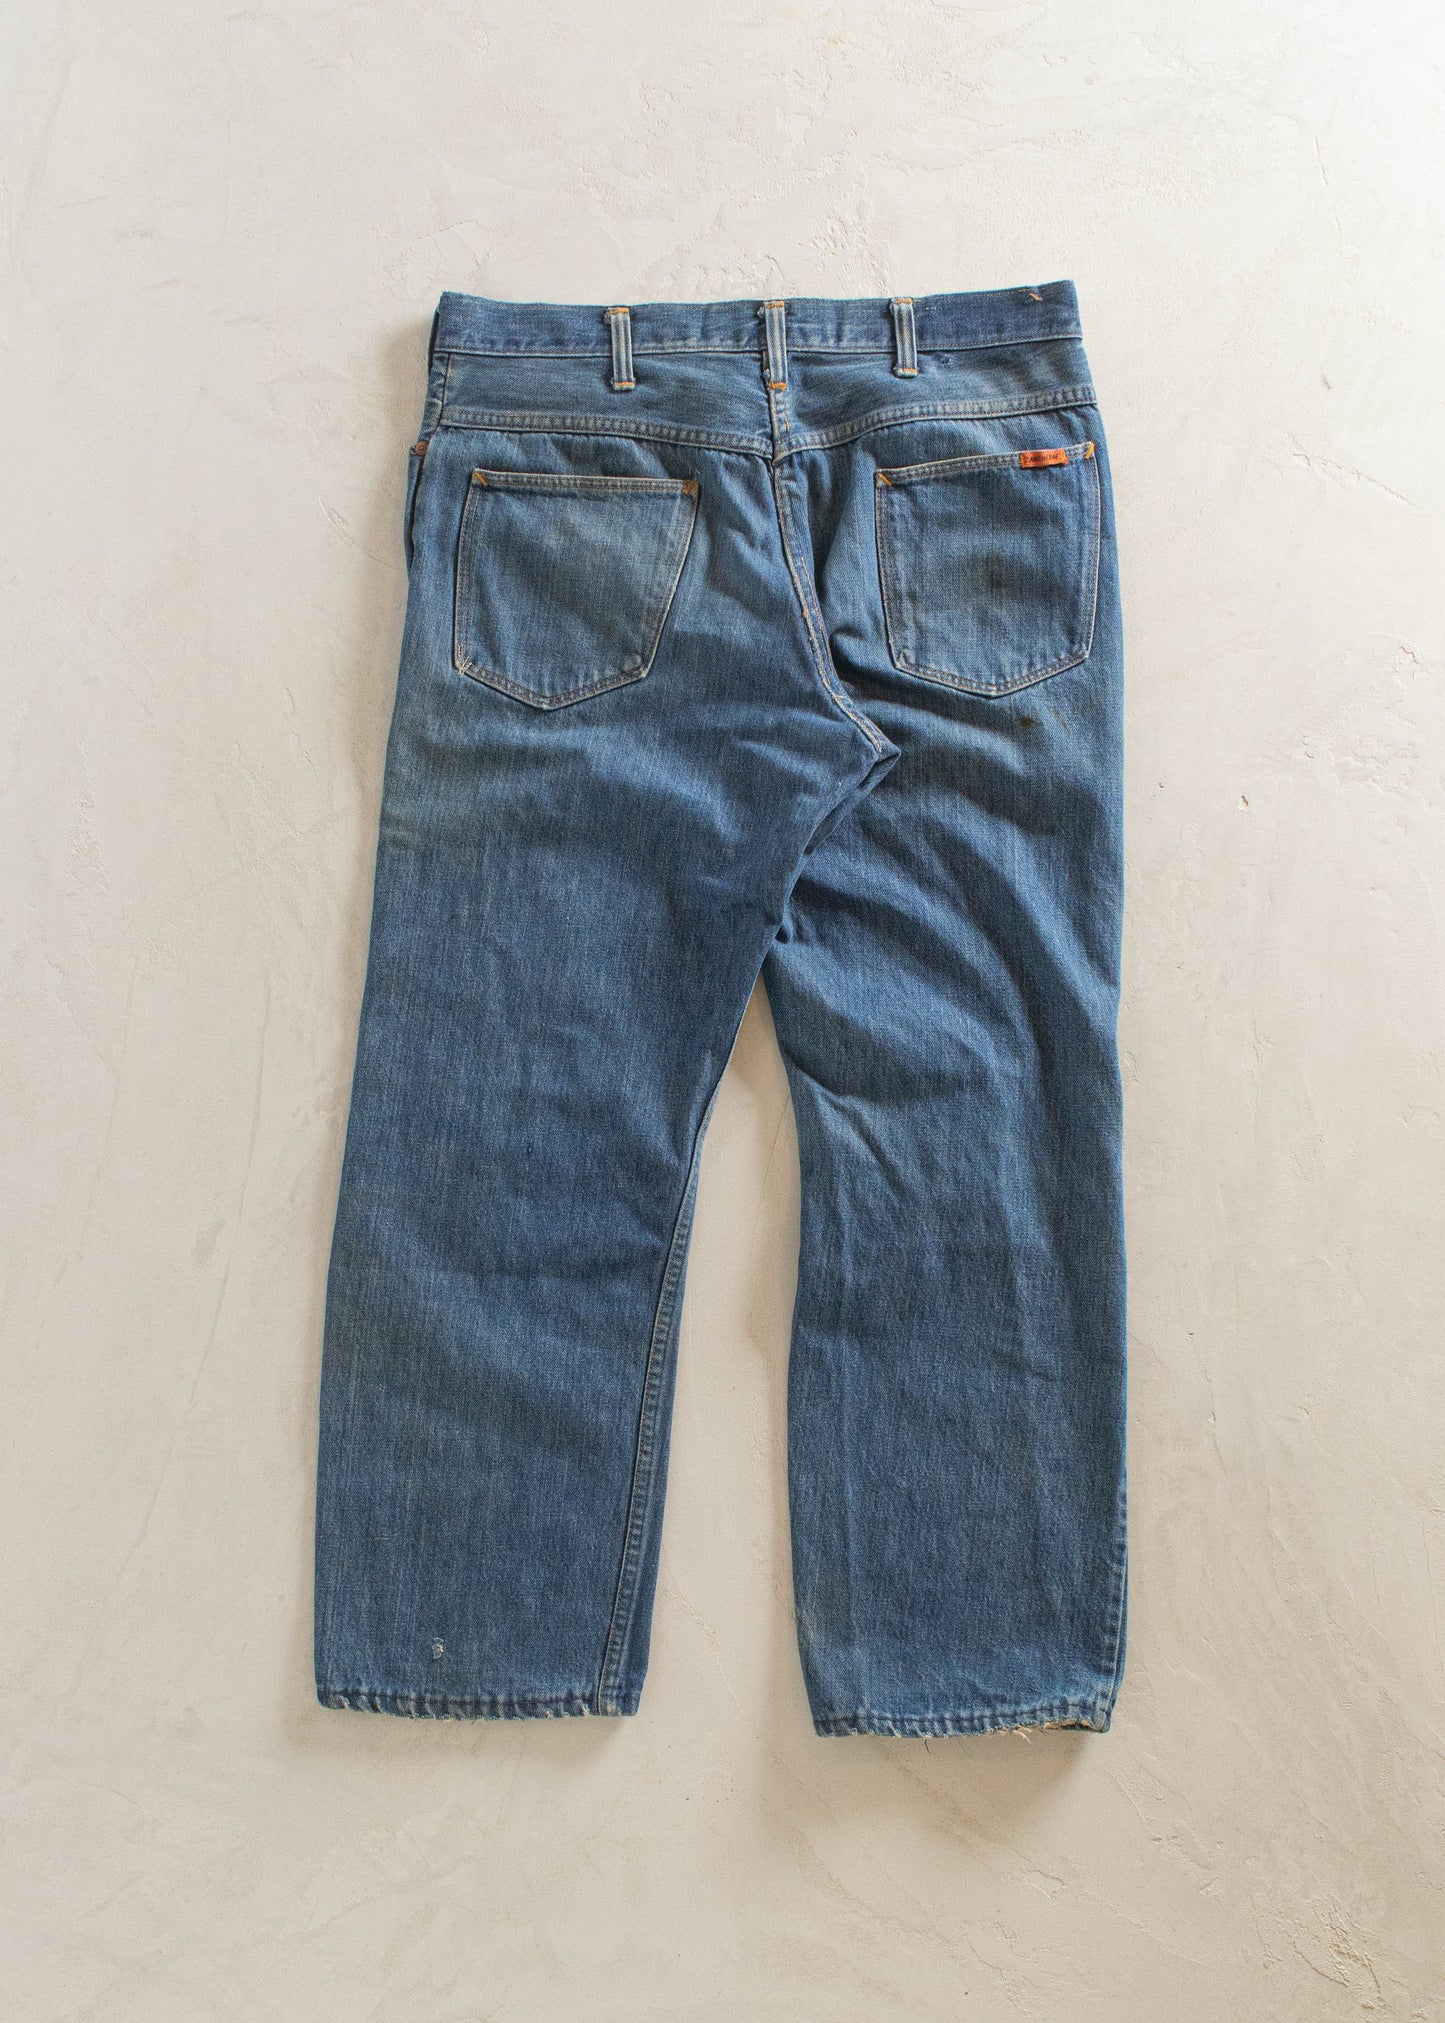 1960s Ranch Craft by JCPenney Mended Jeans Size Women's 32 Men's 32